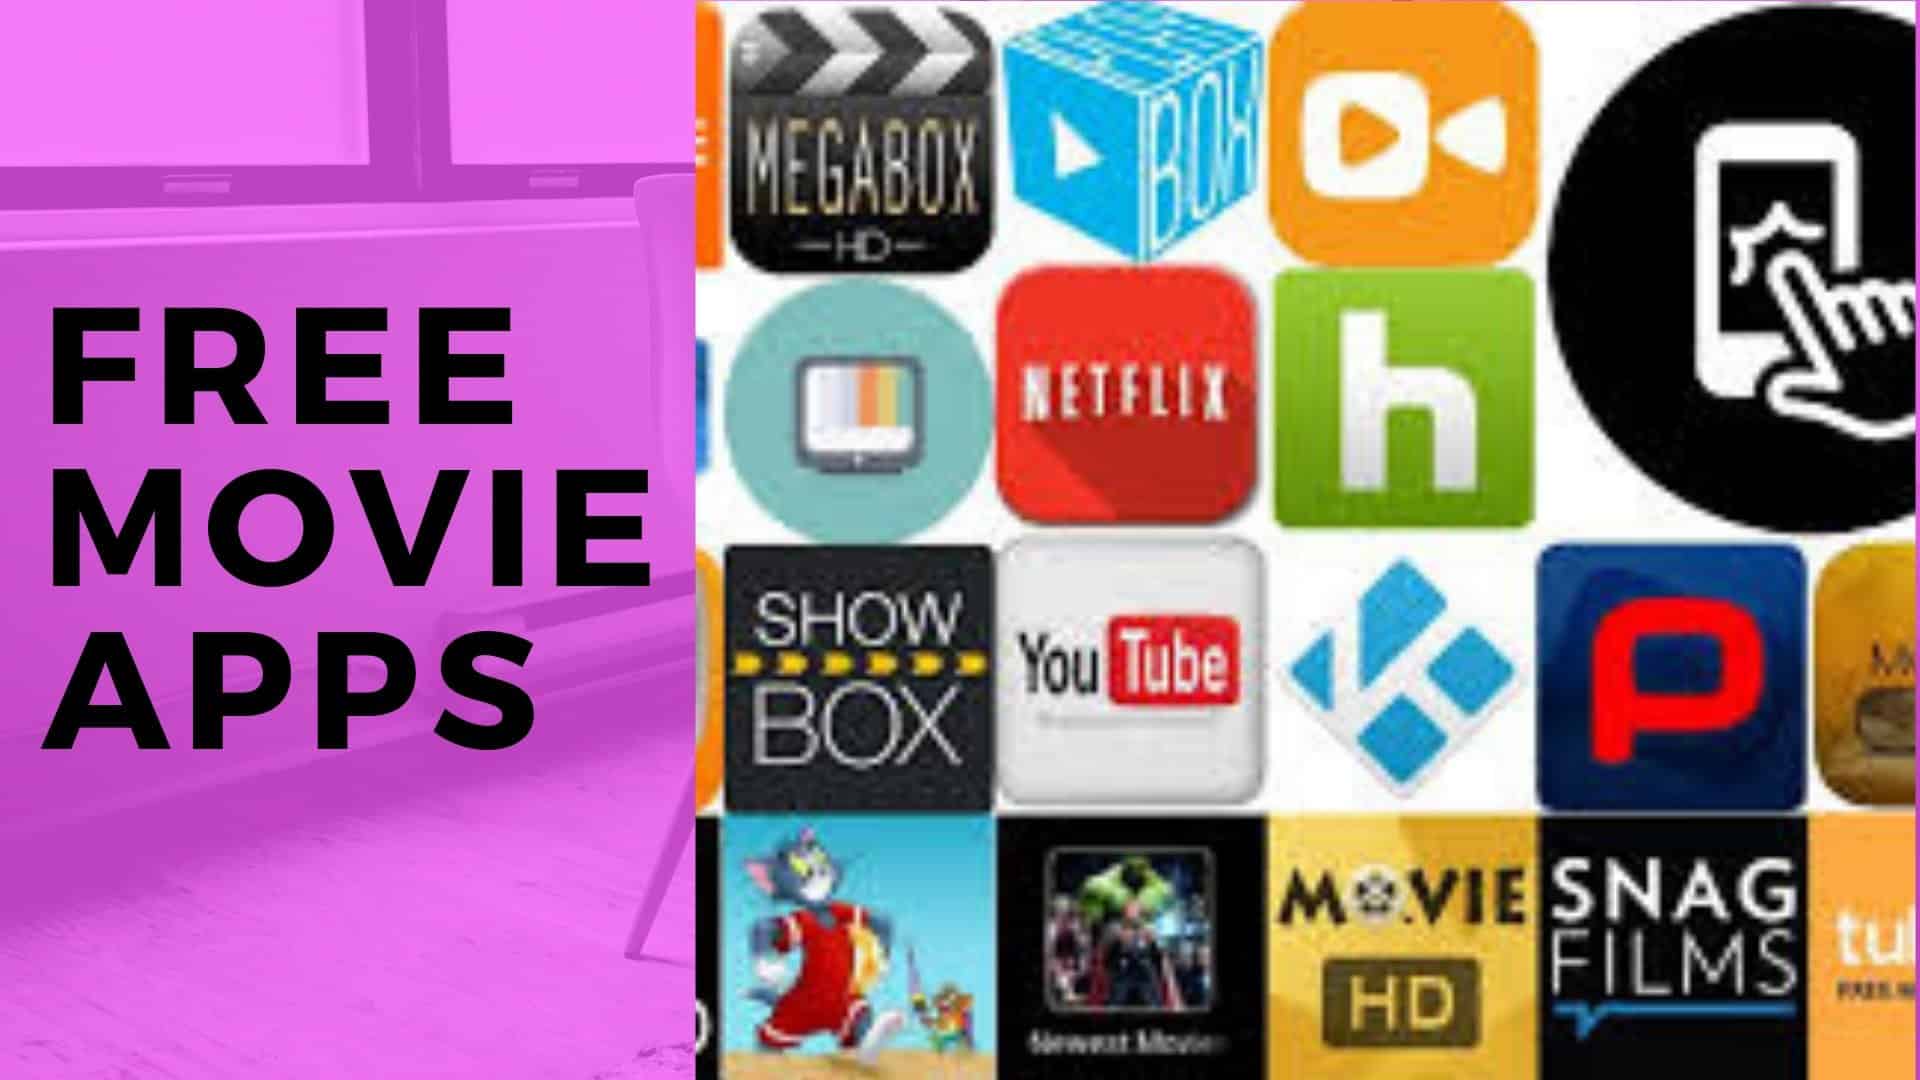 Free movie Apps for Android